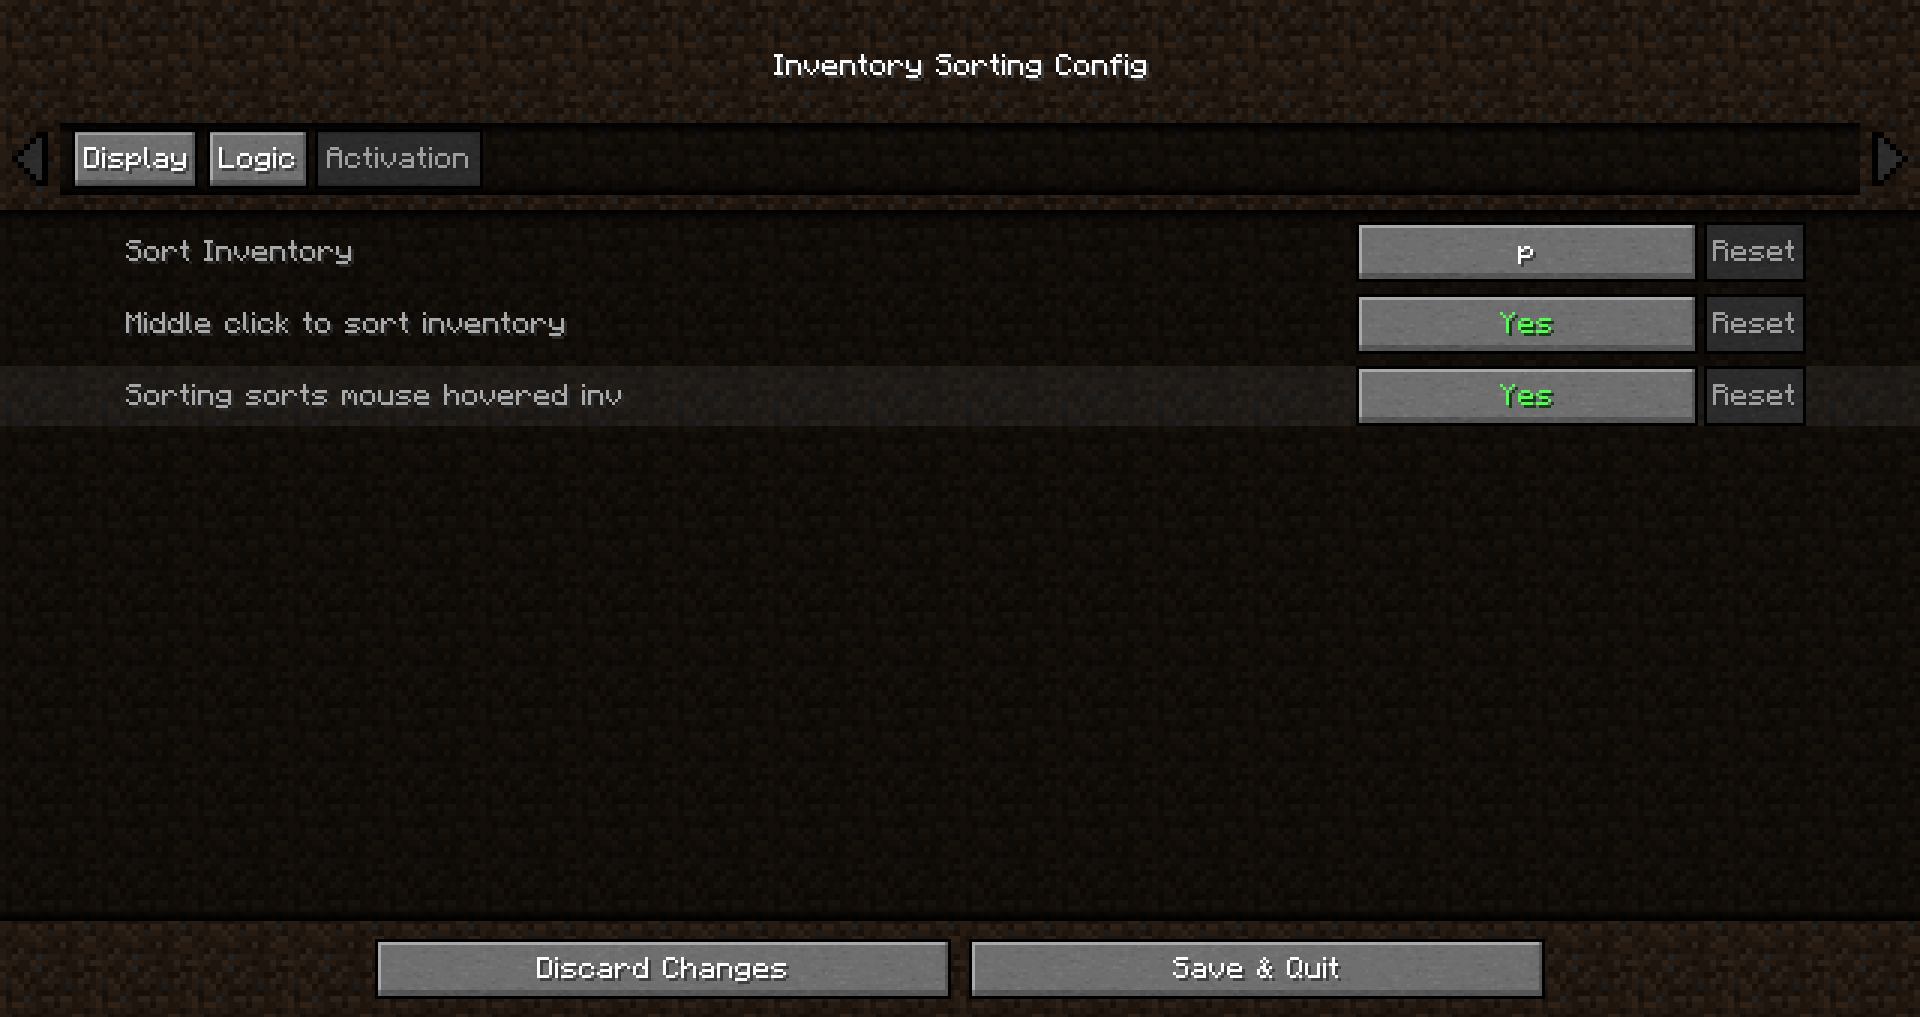 Configuration Inventory Sorting